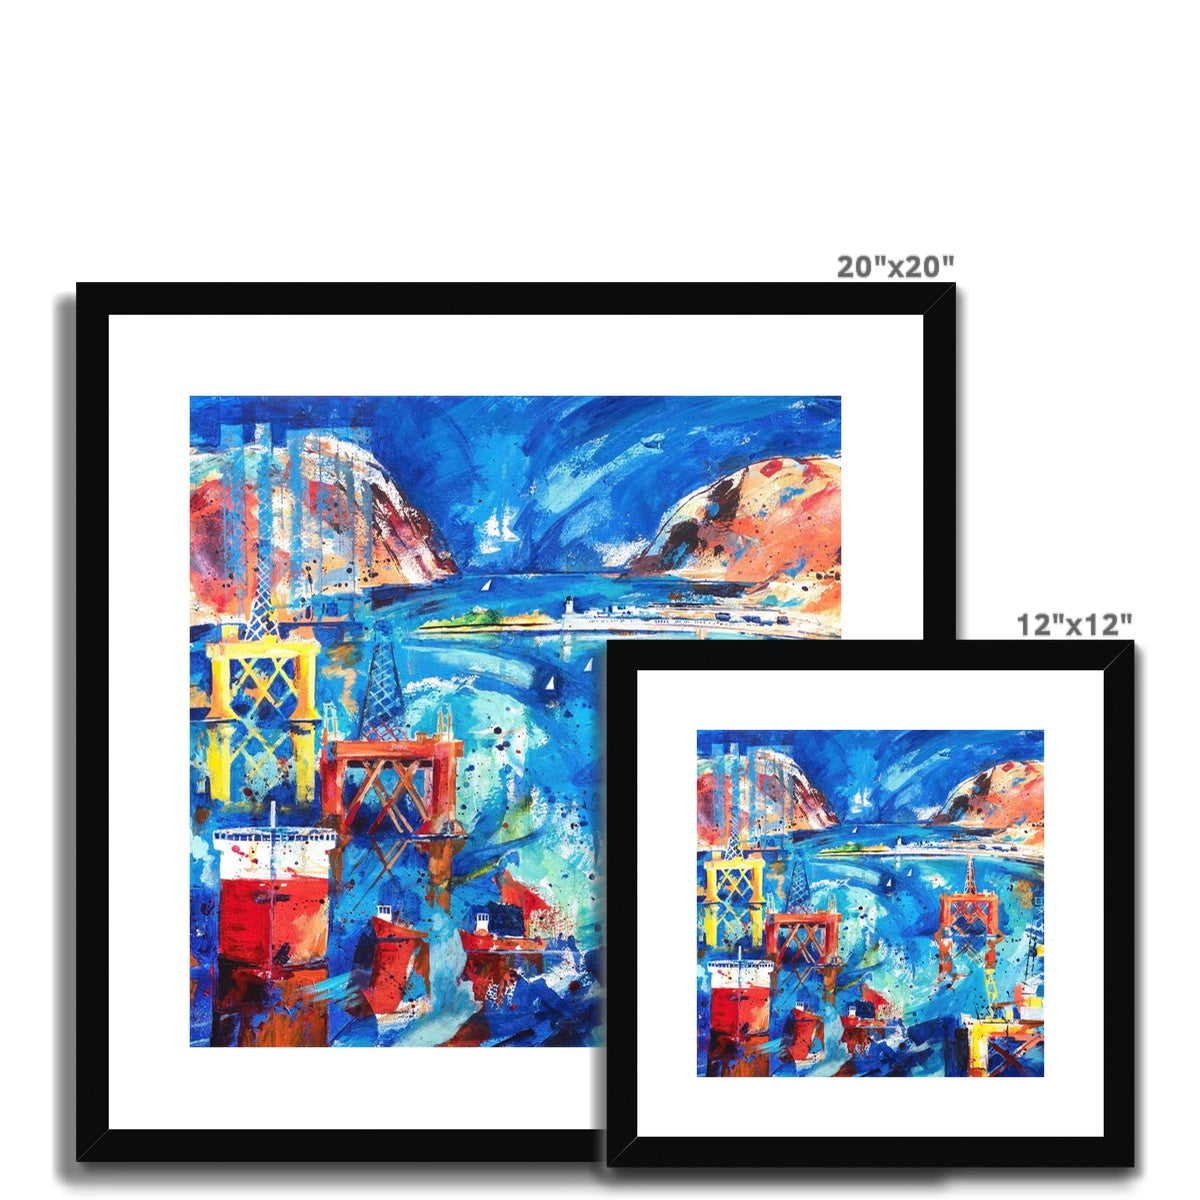 Resting Rigs, Cromarty Firth Framed & Mounted Print